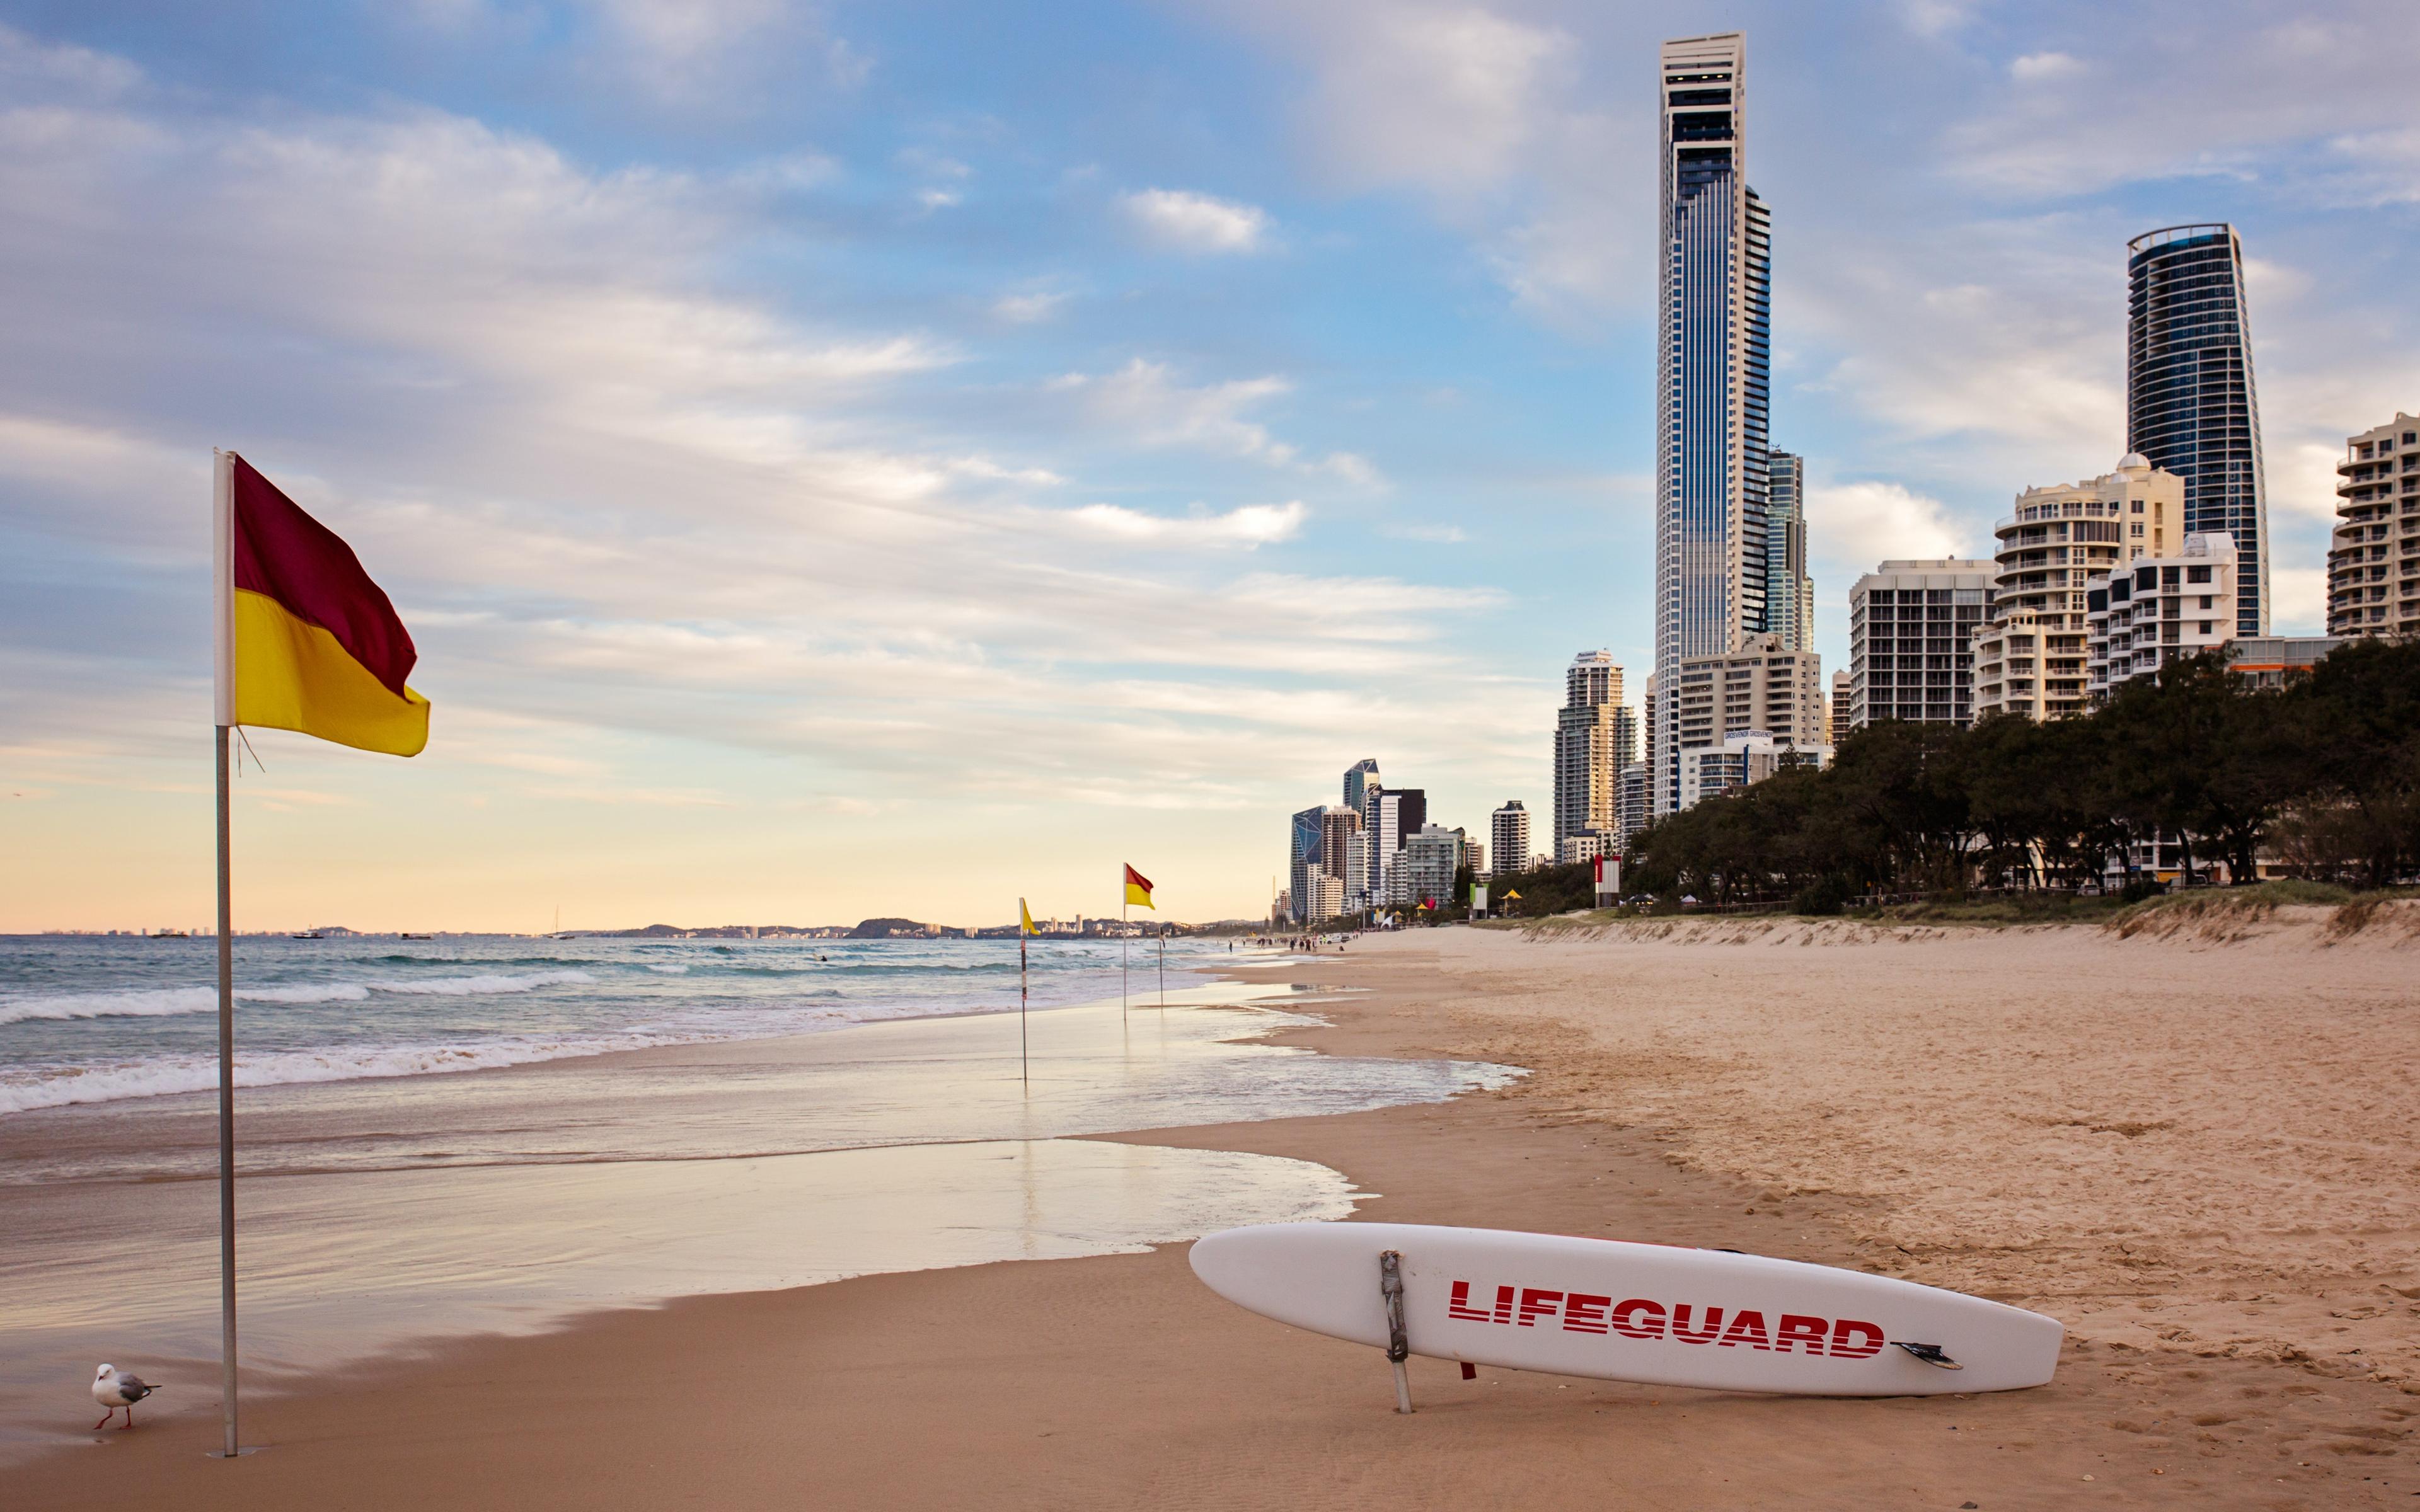 Surfing at Surfers Paradise